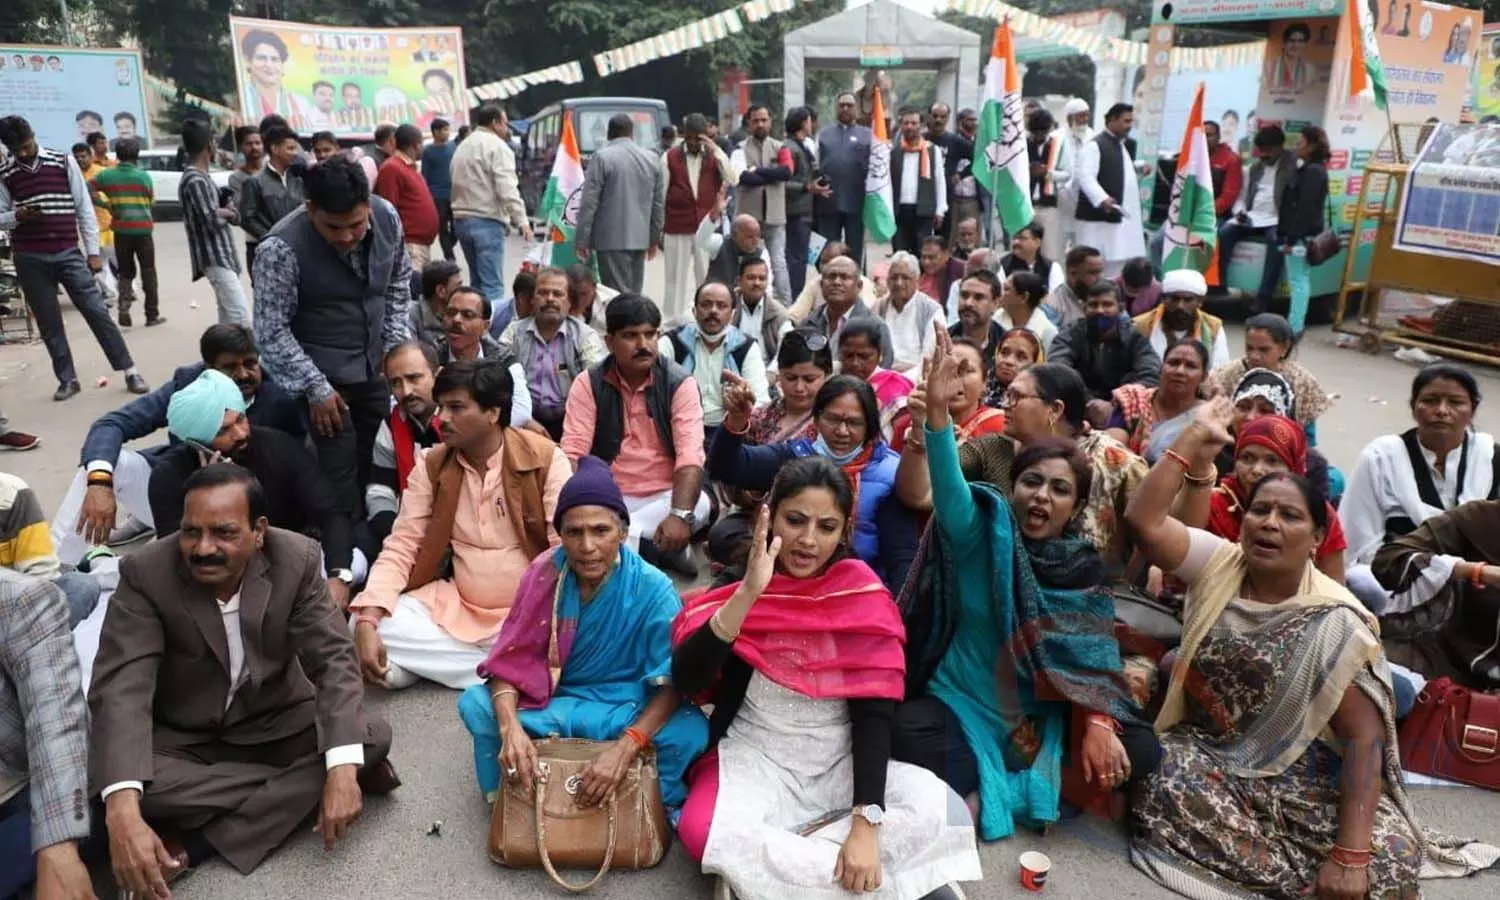 Lucknow News: Congress workers sitting on dharna demanding the dismissal of Minister of State for Home Ajay Mishra Teni, see photos